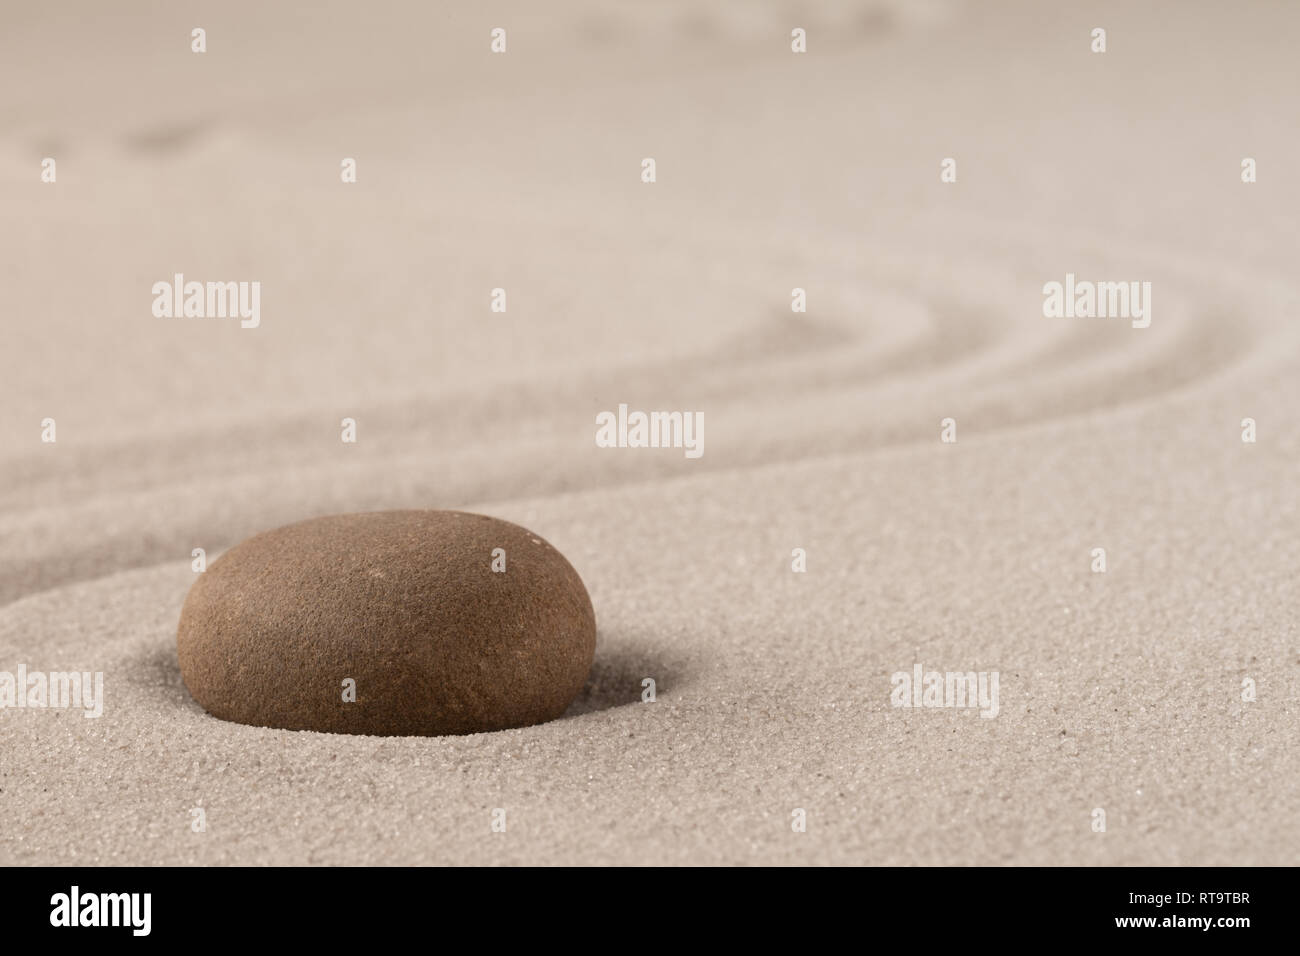 Concentration trough focus on a zen meditation stone. Round rock in sand texture background. Concept for yoga or spa welness treatment. Stock Photo